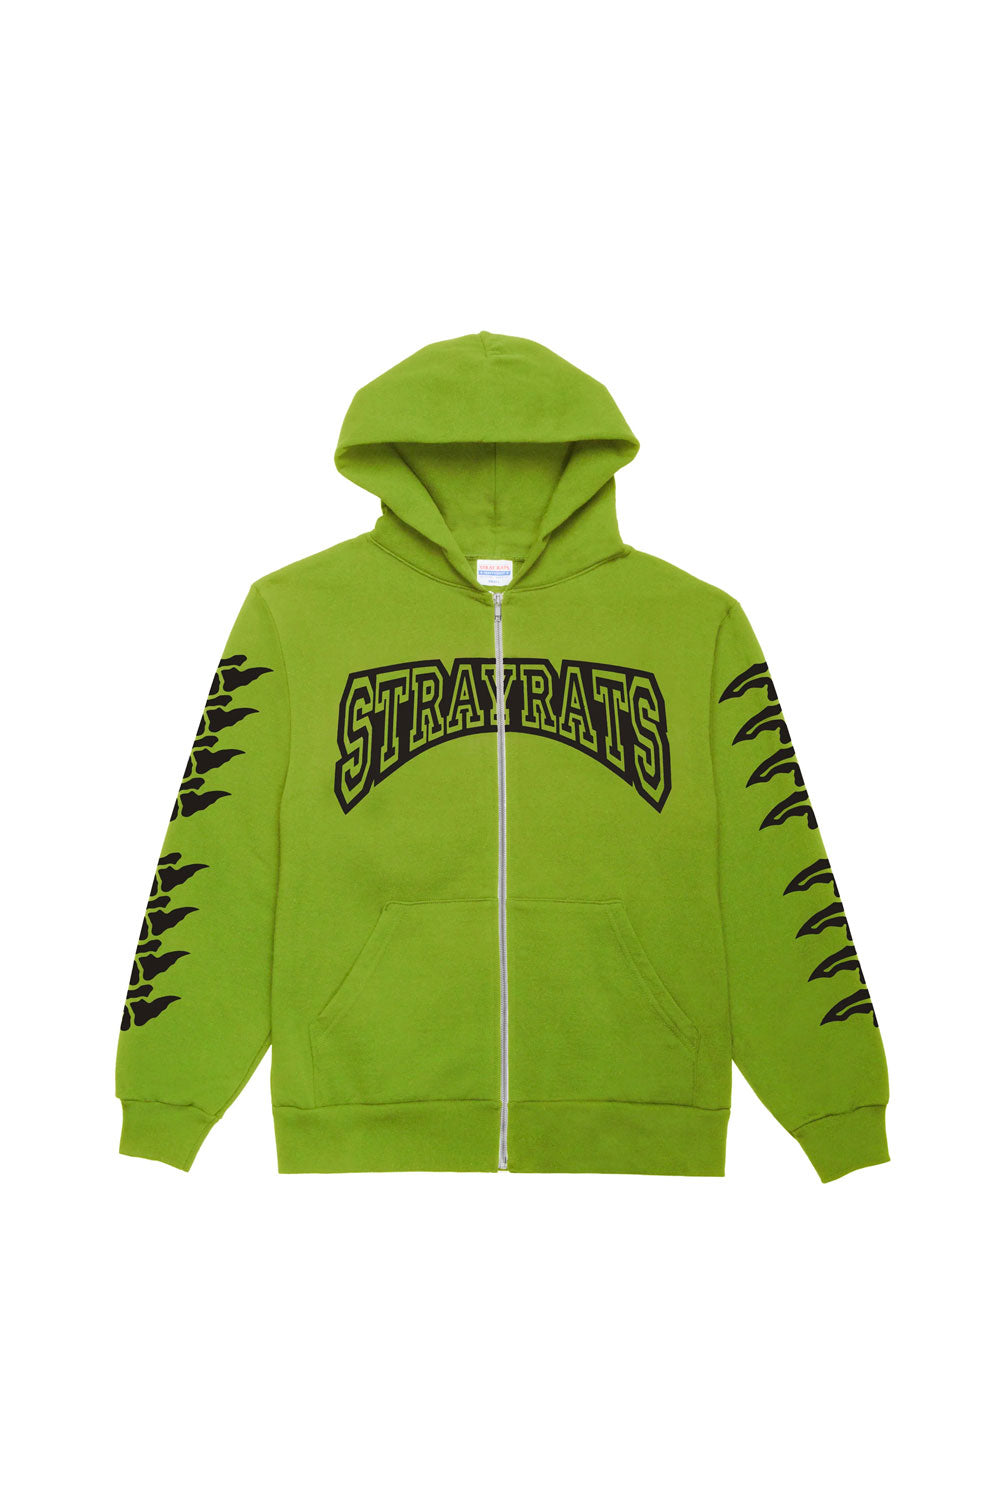 The STRAY RATS -  EXO ZIP UP HOODIE LIME available online with global shipping, and in PAM Stores Melbourne and Sydney.